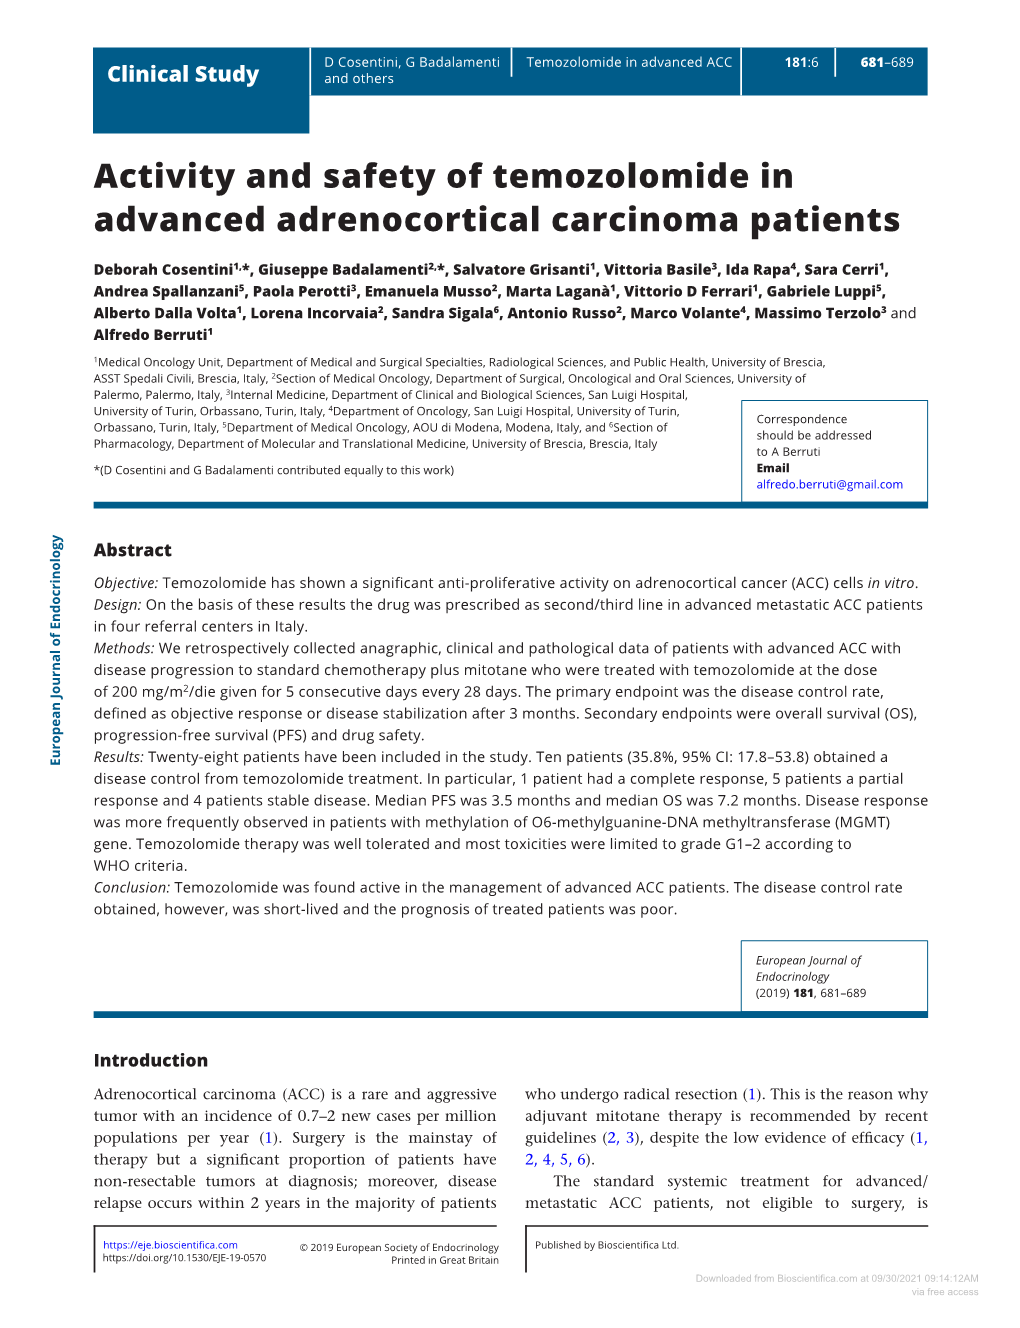 Activity and Safety of Temozolomide in Advanced Adrenocortical Carcinoma Patients